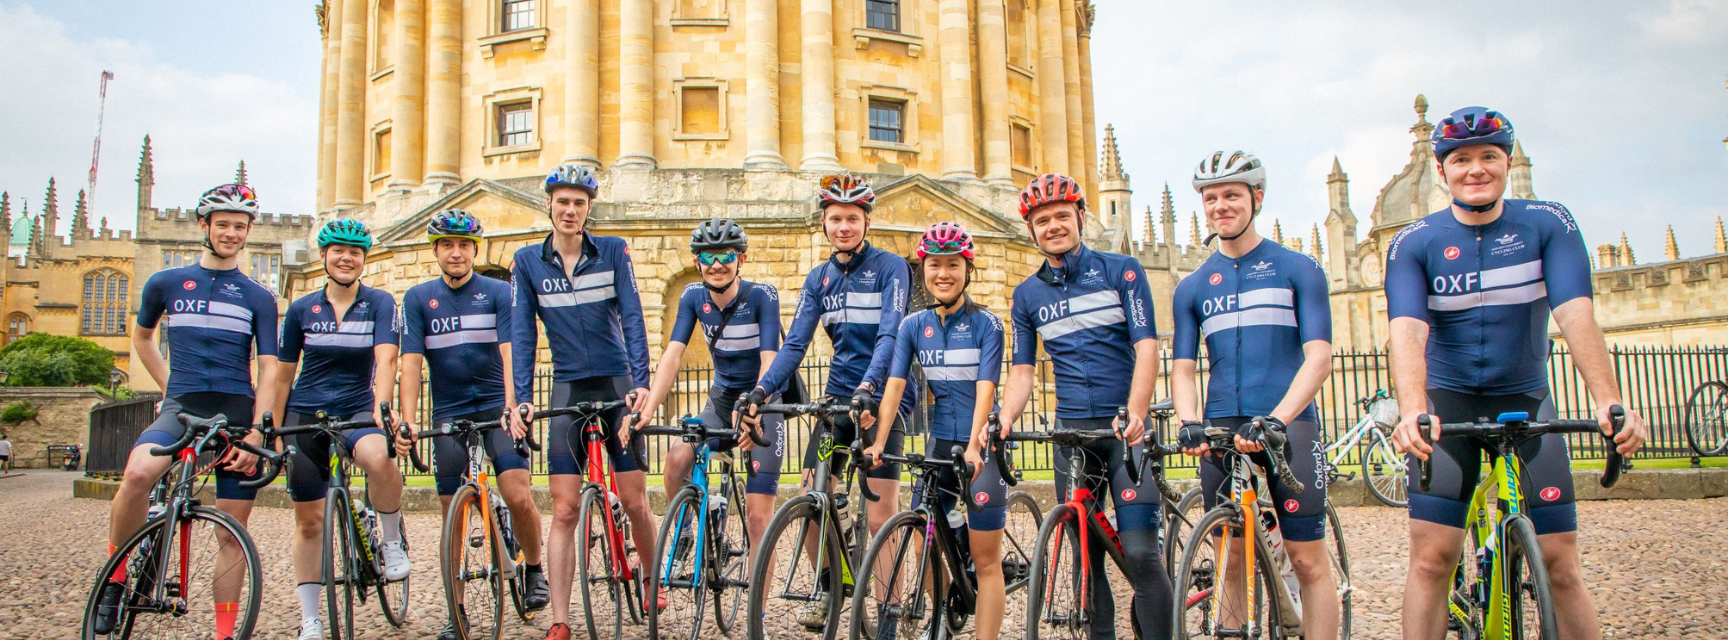 An image of cyclists in Oxford blue kit, posing with their bikes in front of the Radcliffe Camera in Oxford